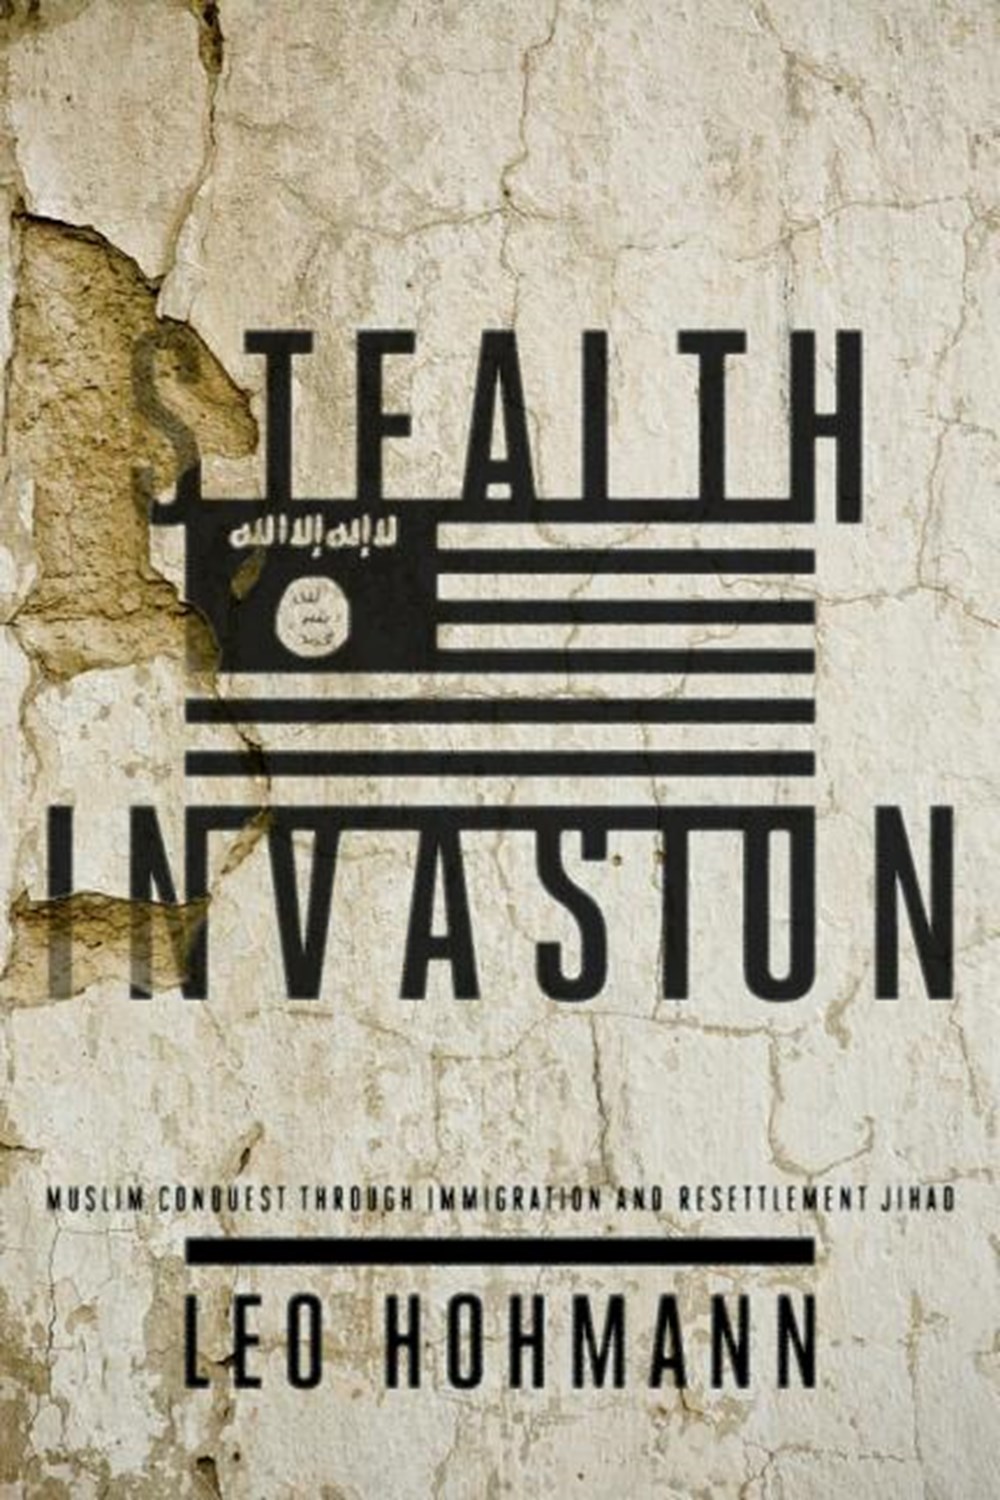 Stealth Invasion: Muslim Conquest Through Immigration and Resettlement Jihad